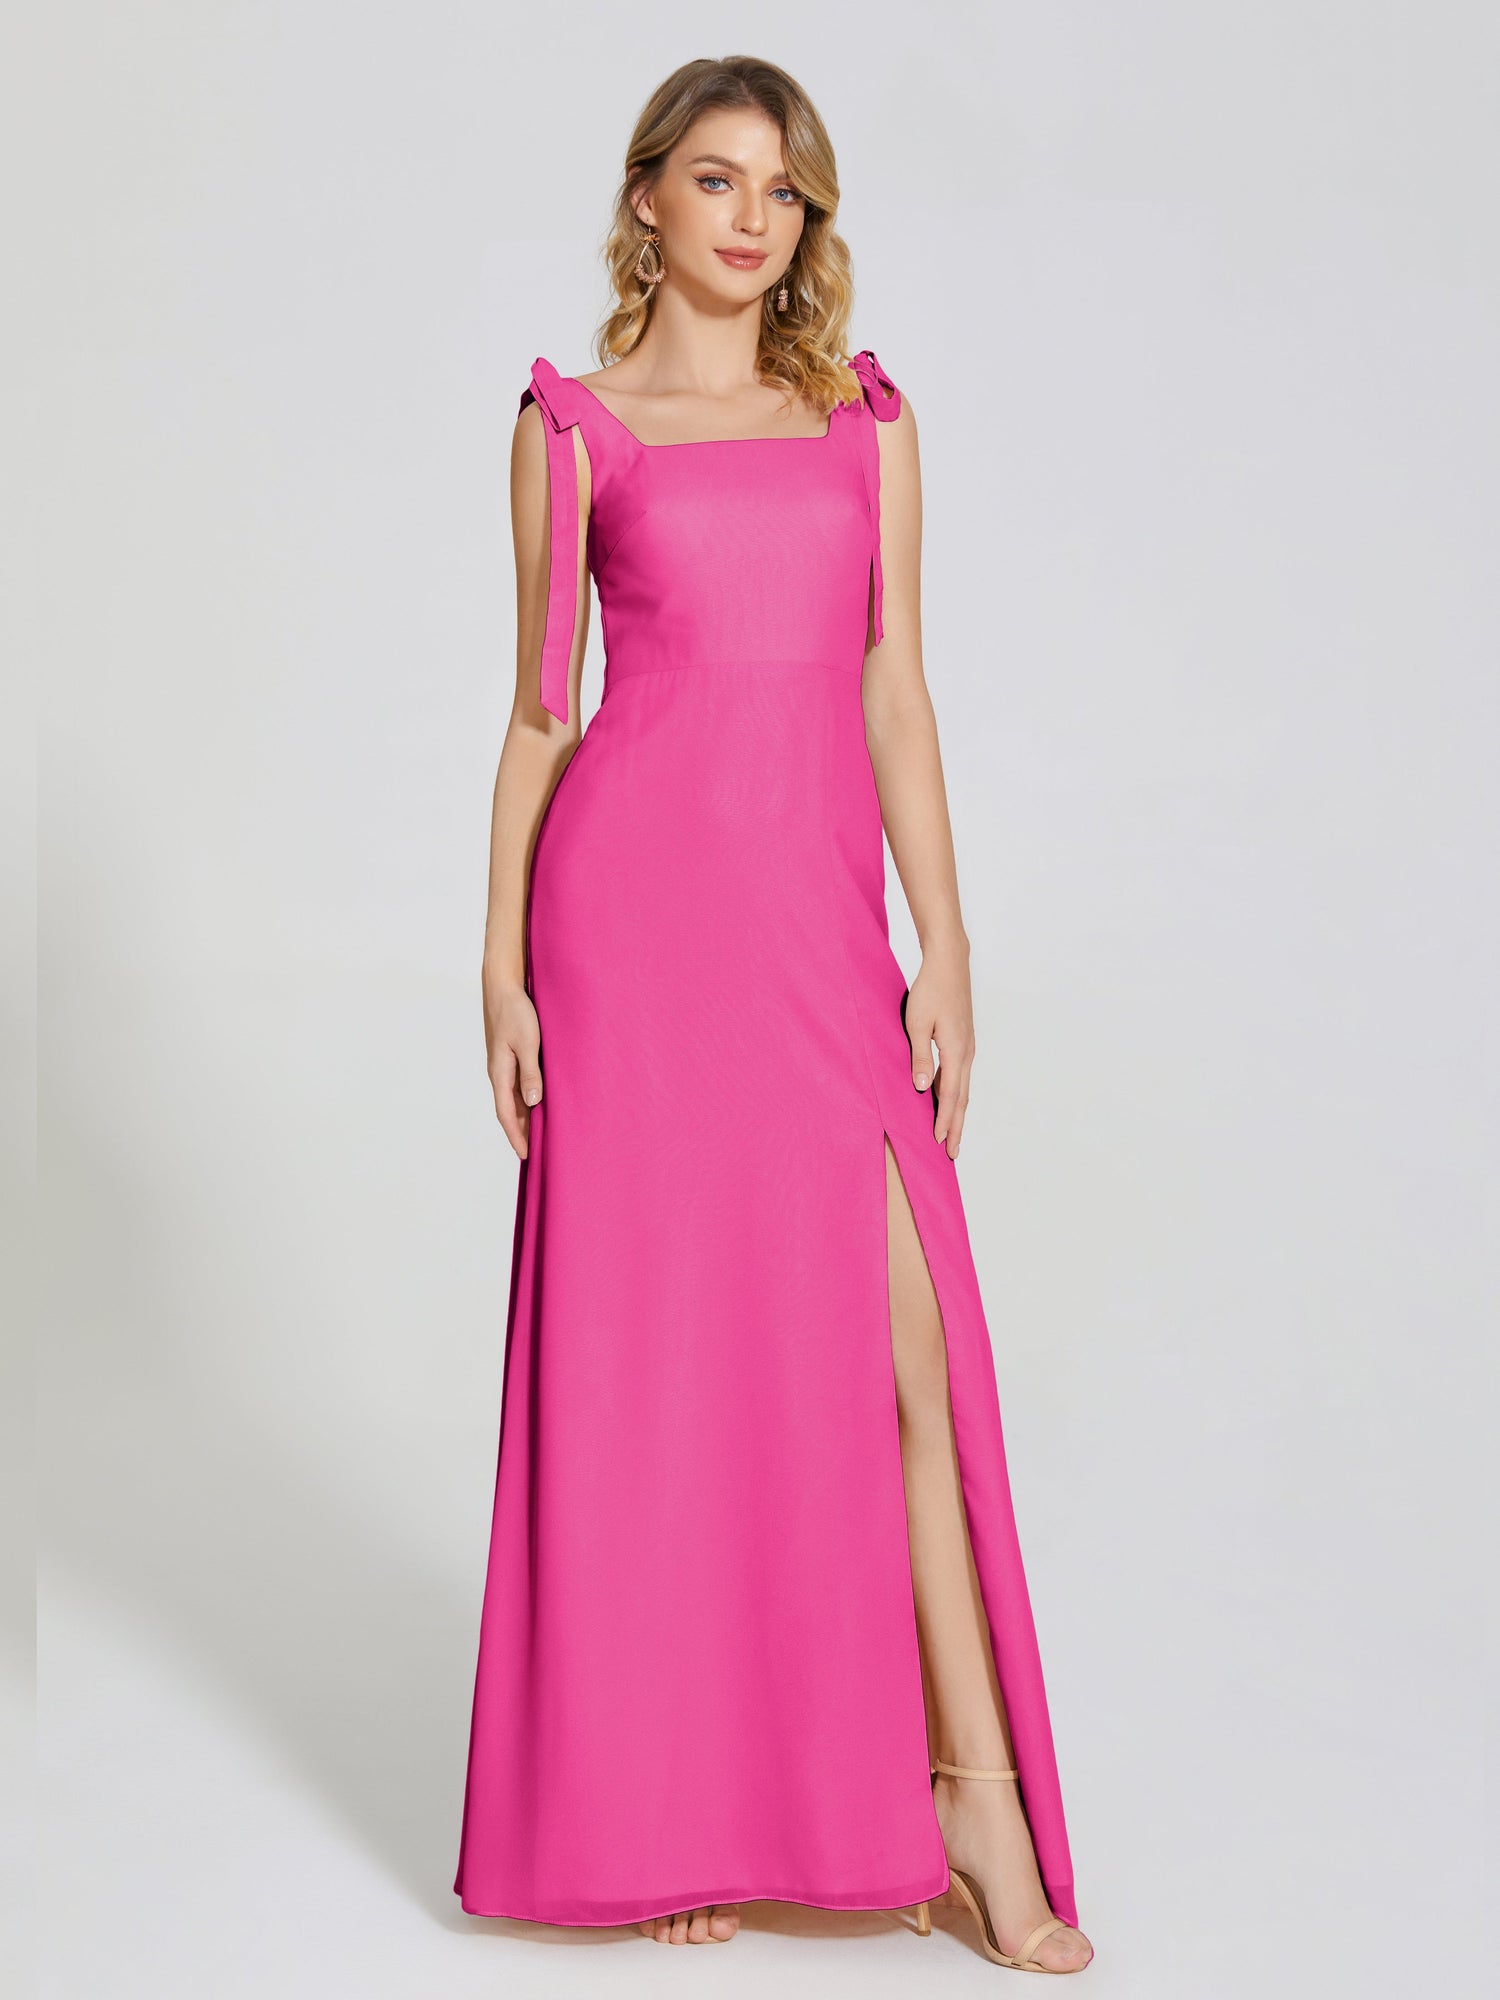 SATIN DRESS WITH SHOULDER KNOT - Fuchsia